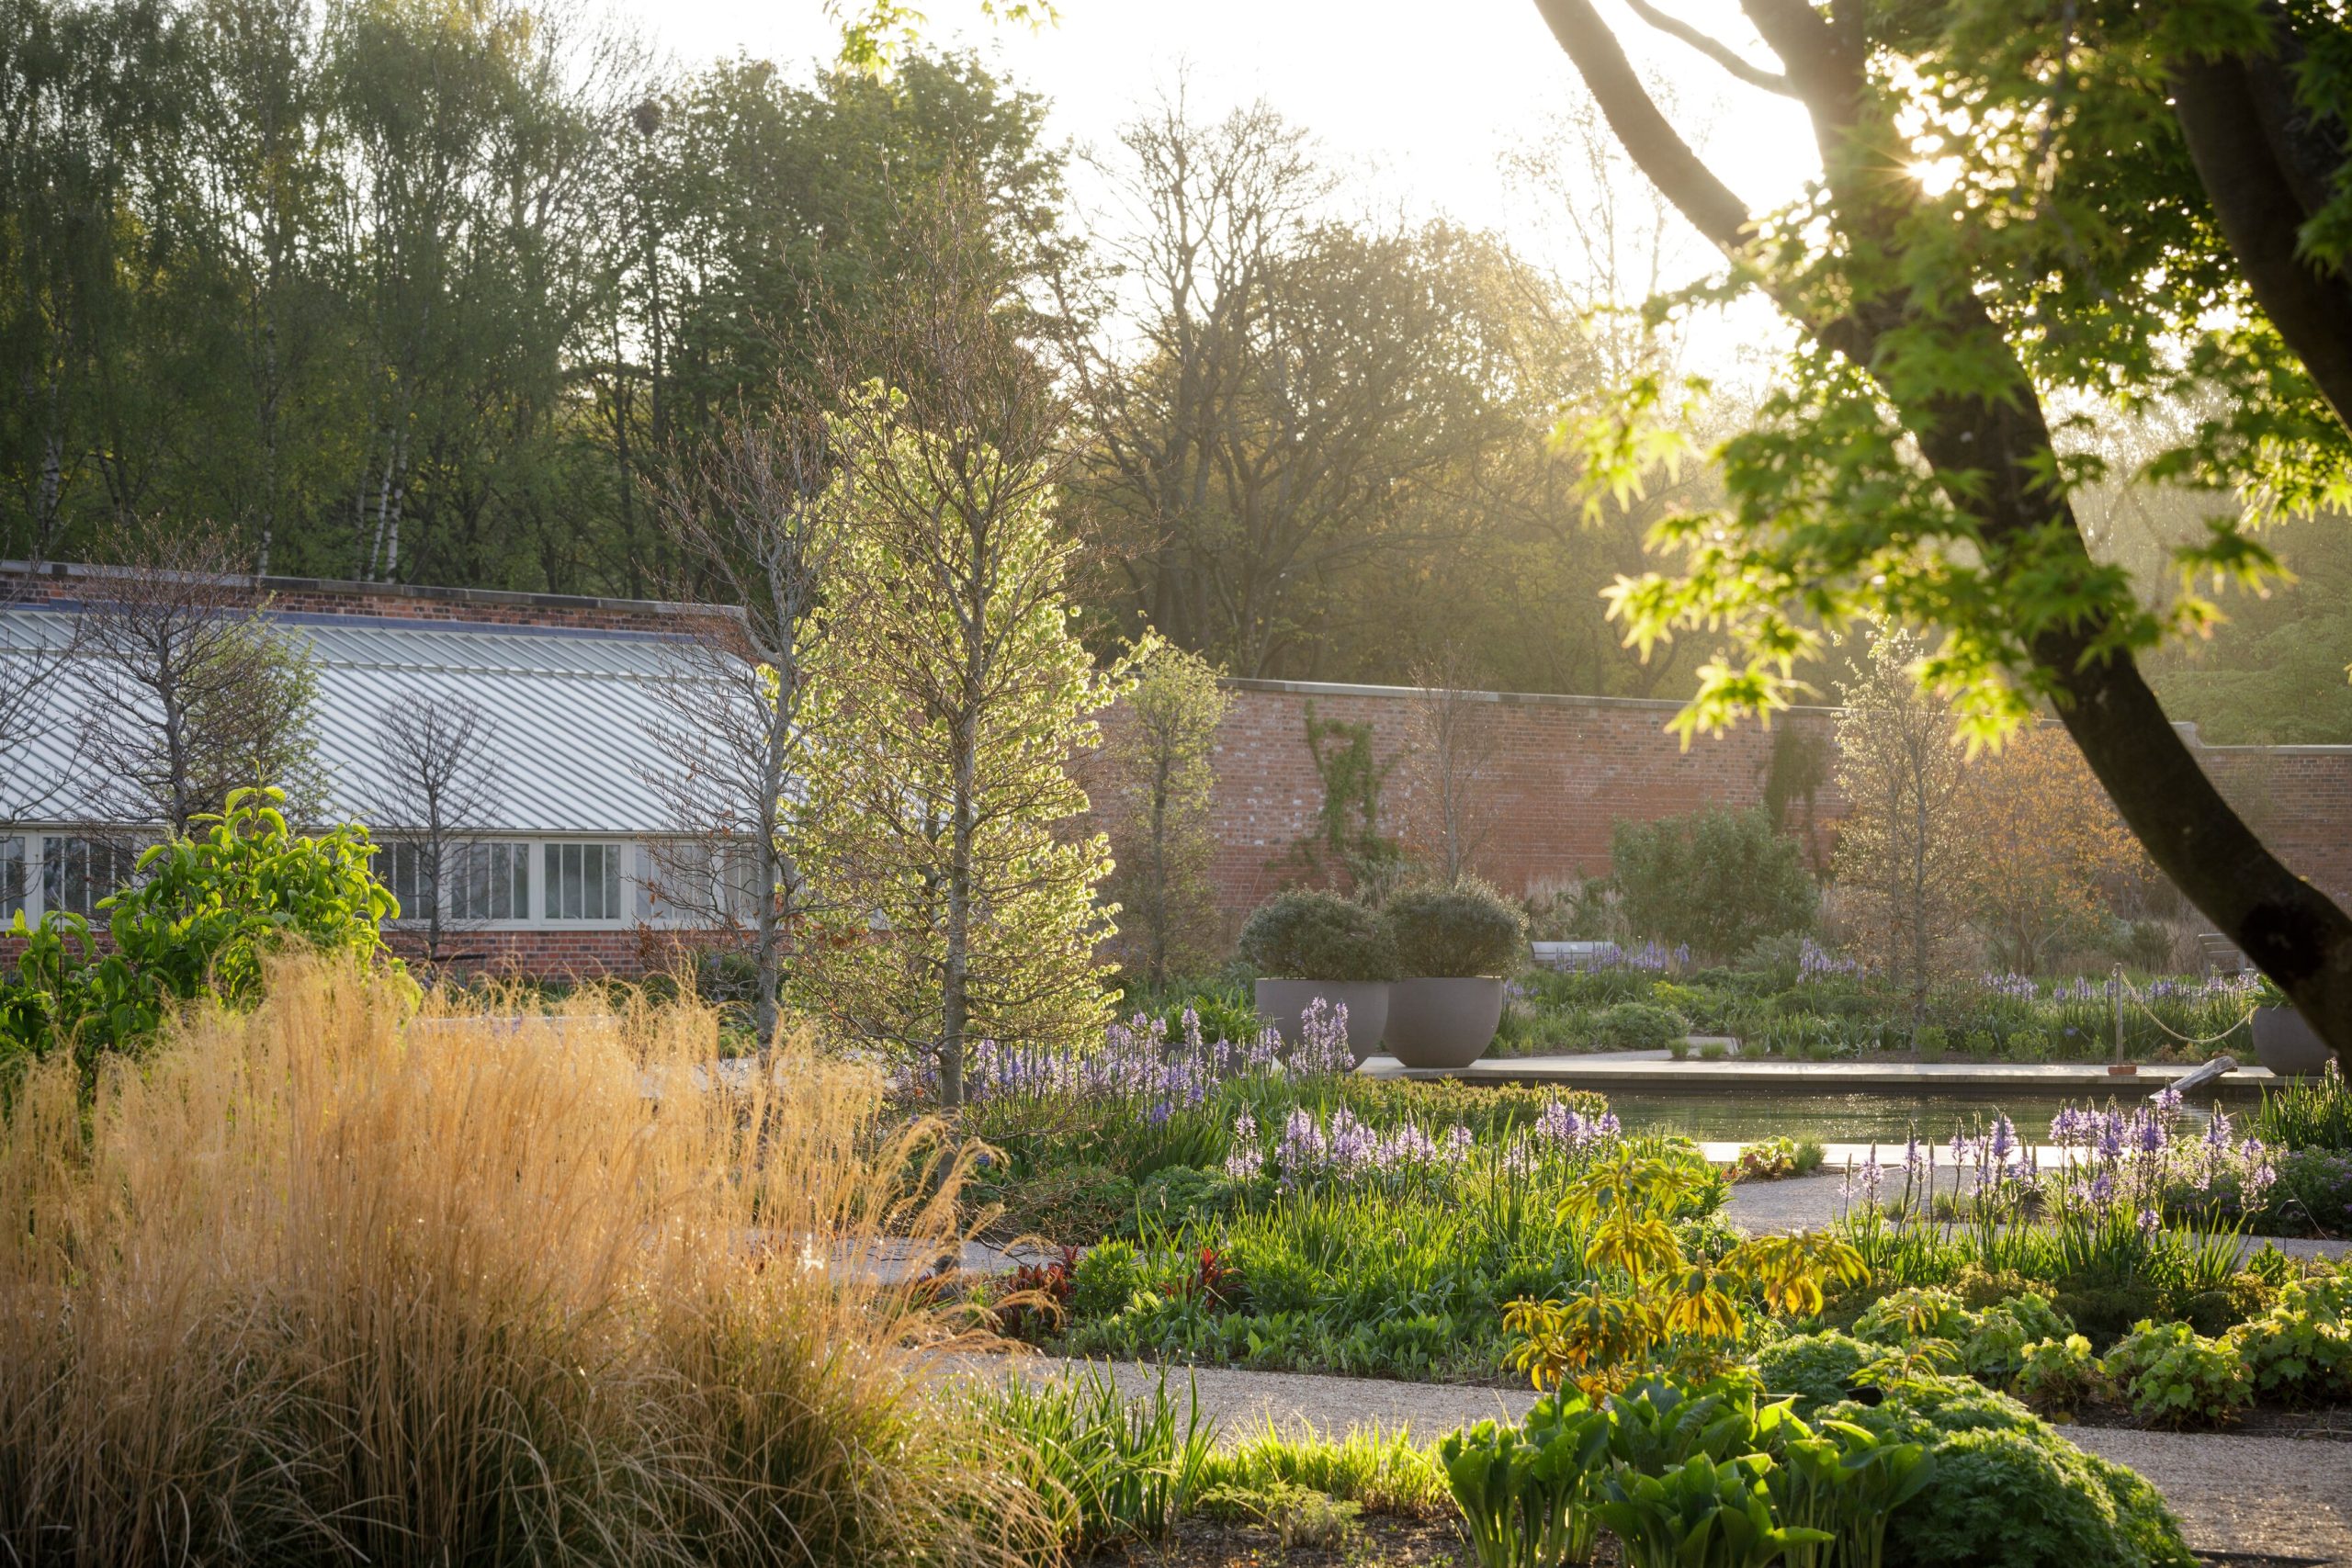 Free Tuesday entry for Salford residents visiting RHS Garden Bridgewater